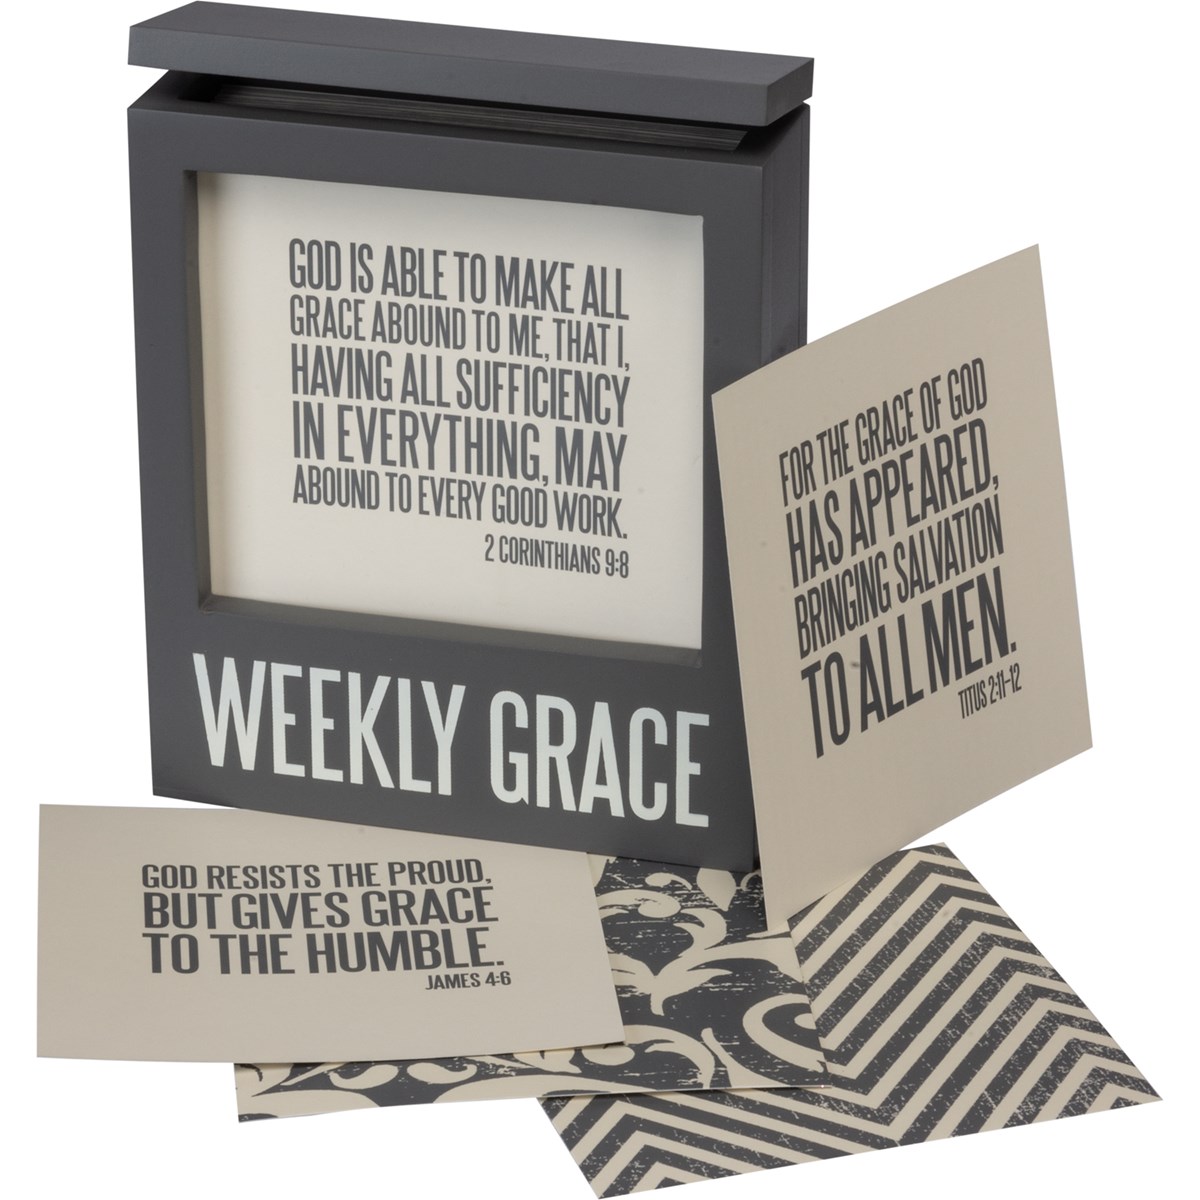 Words Of Wisdom - Weekly Grace - 5.75" x 6.75" x 2.25", Cards: 5" x 5" - Wood, Paper, Metal